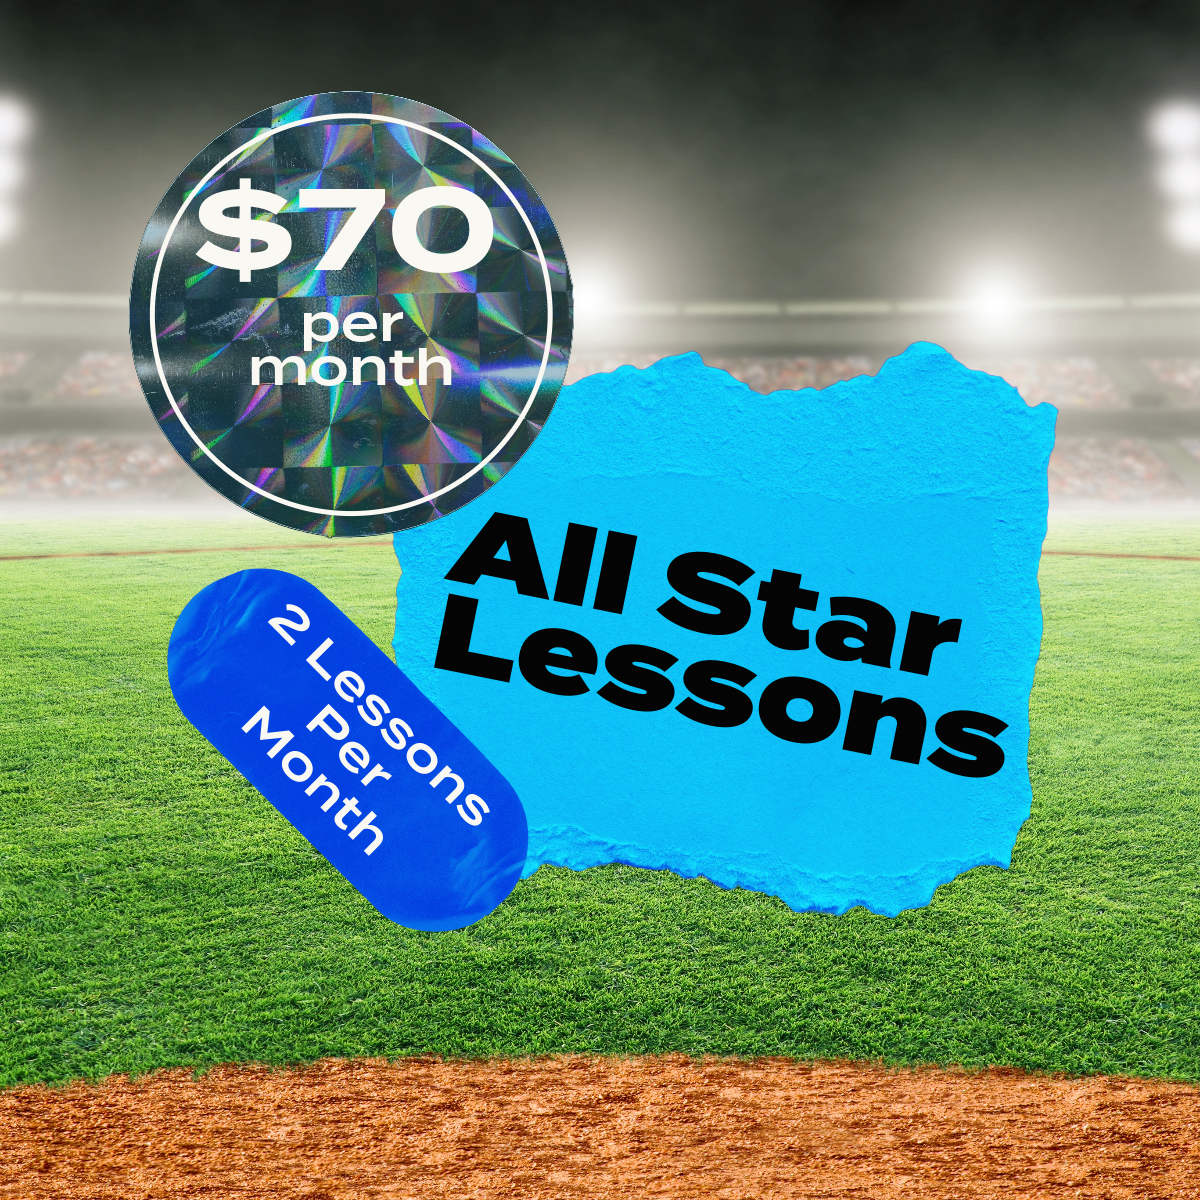 All Star Lessons (1)